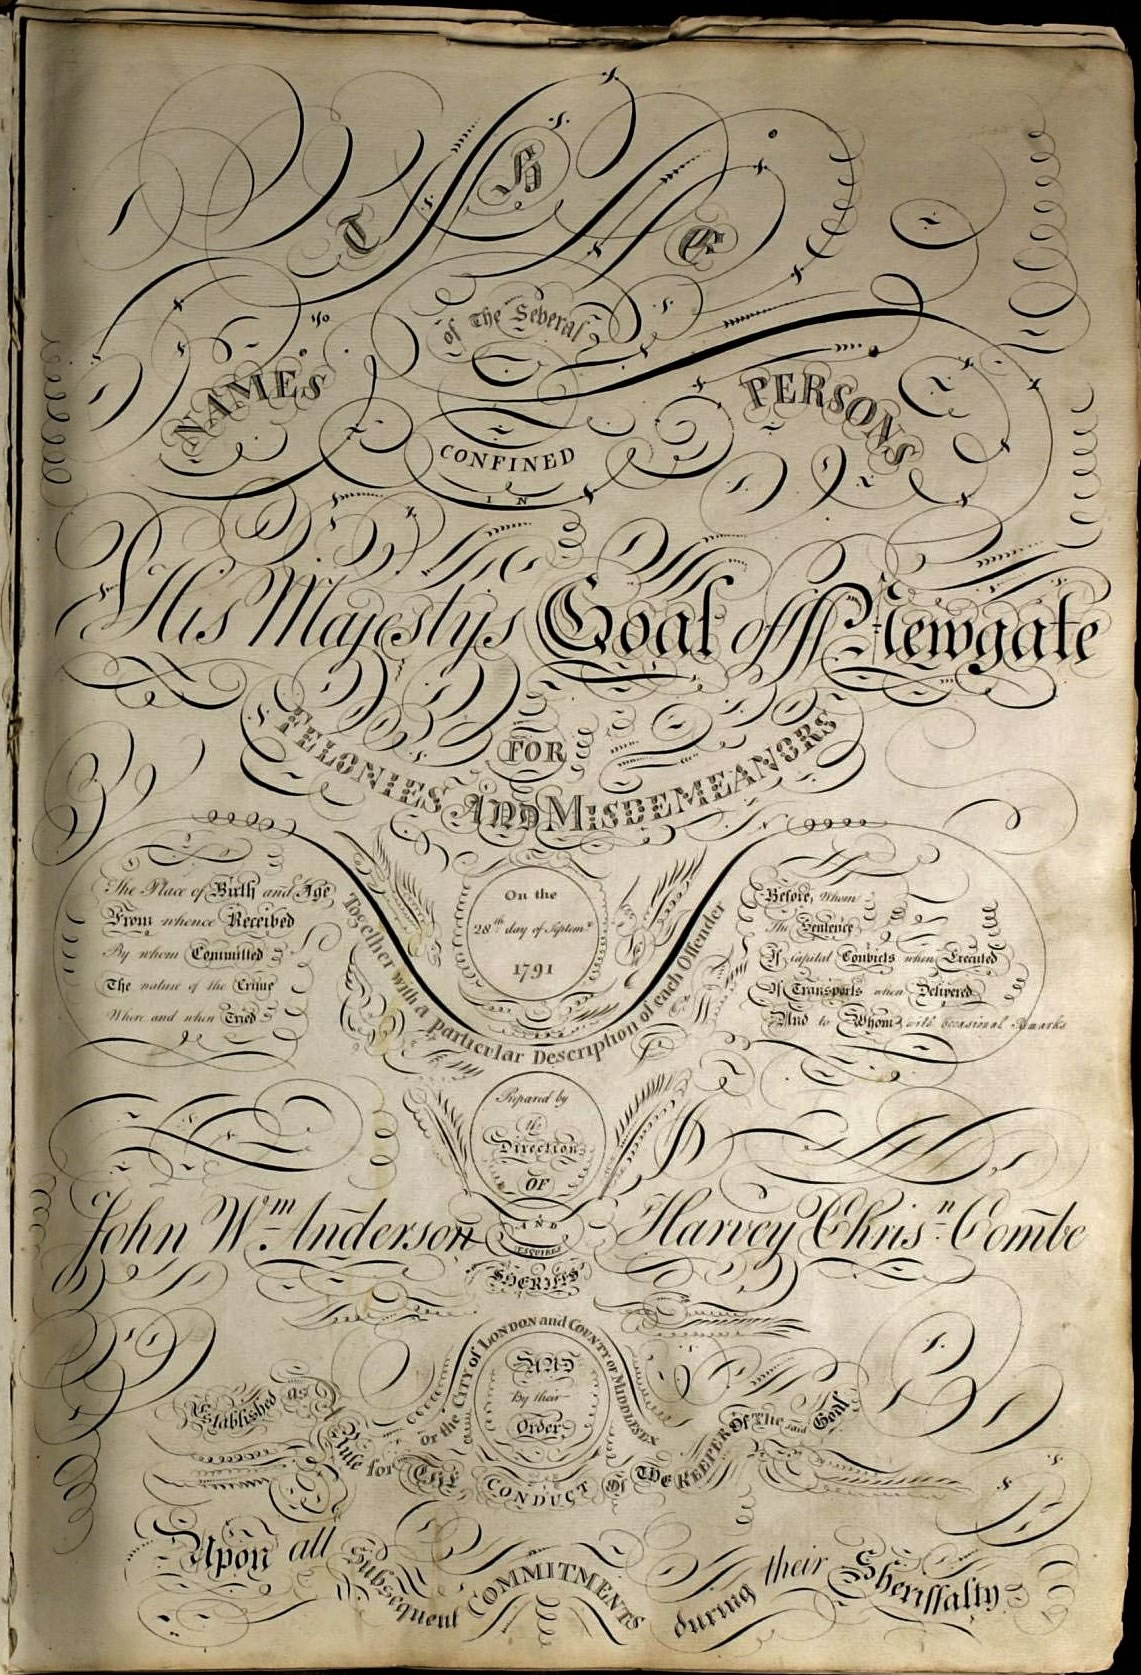 The Title page of a prison register for Newgate Gaol